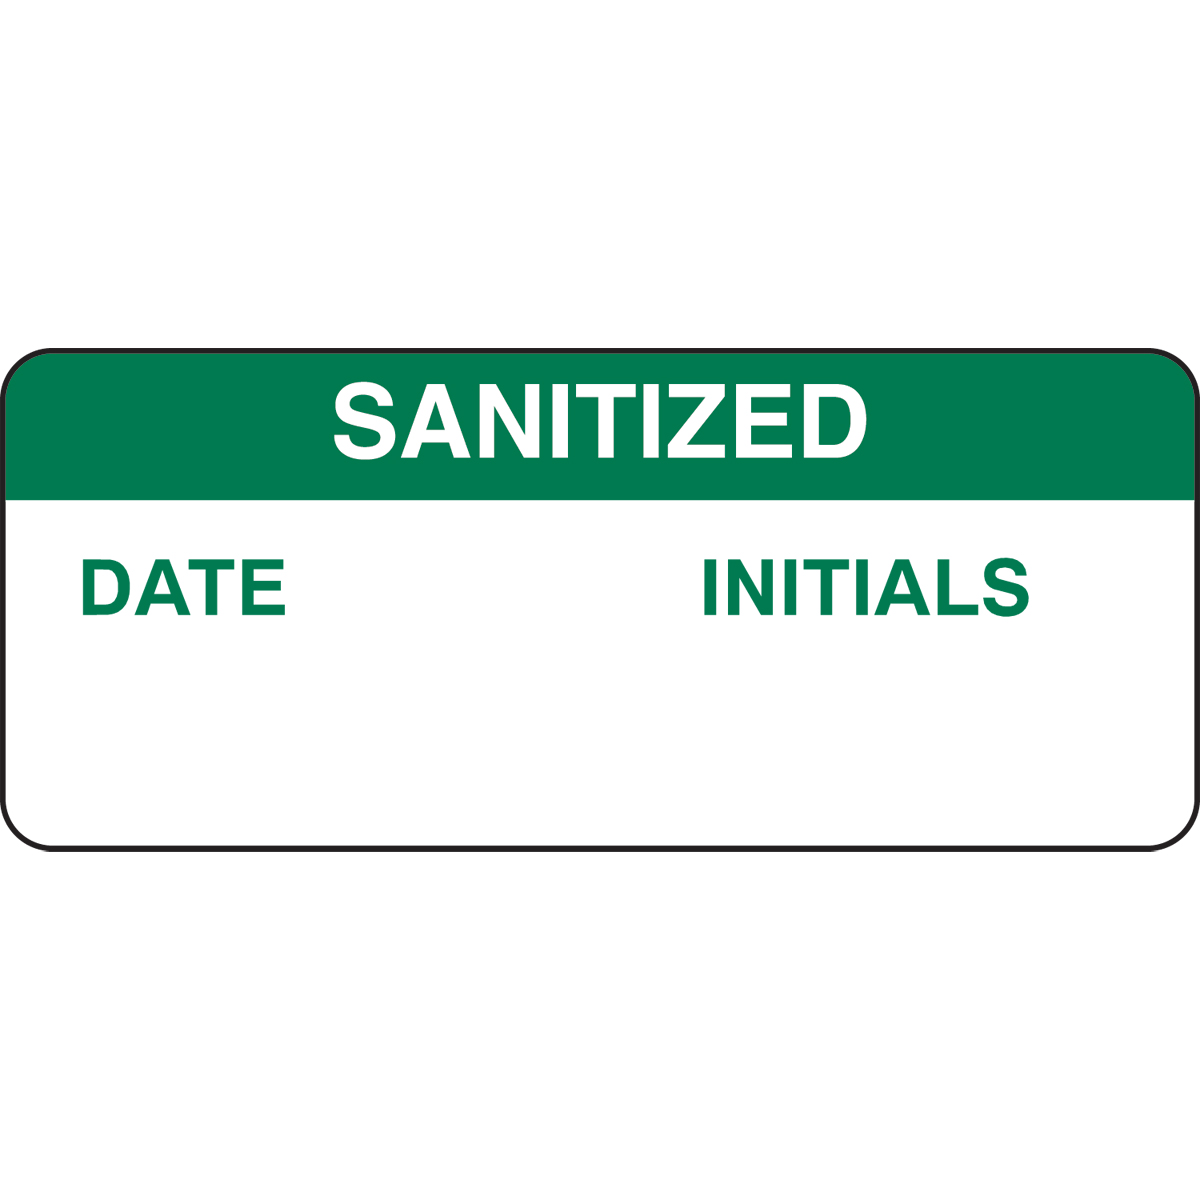 Sanitized Write-On Inspection Labels